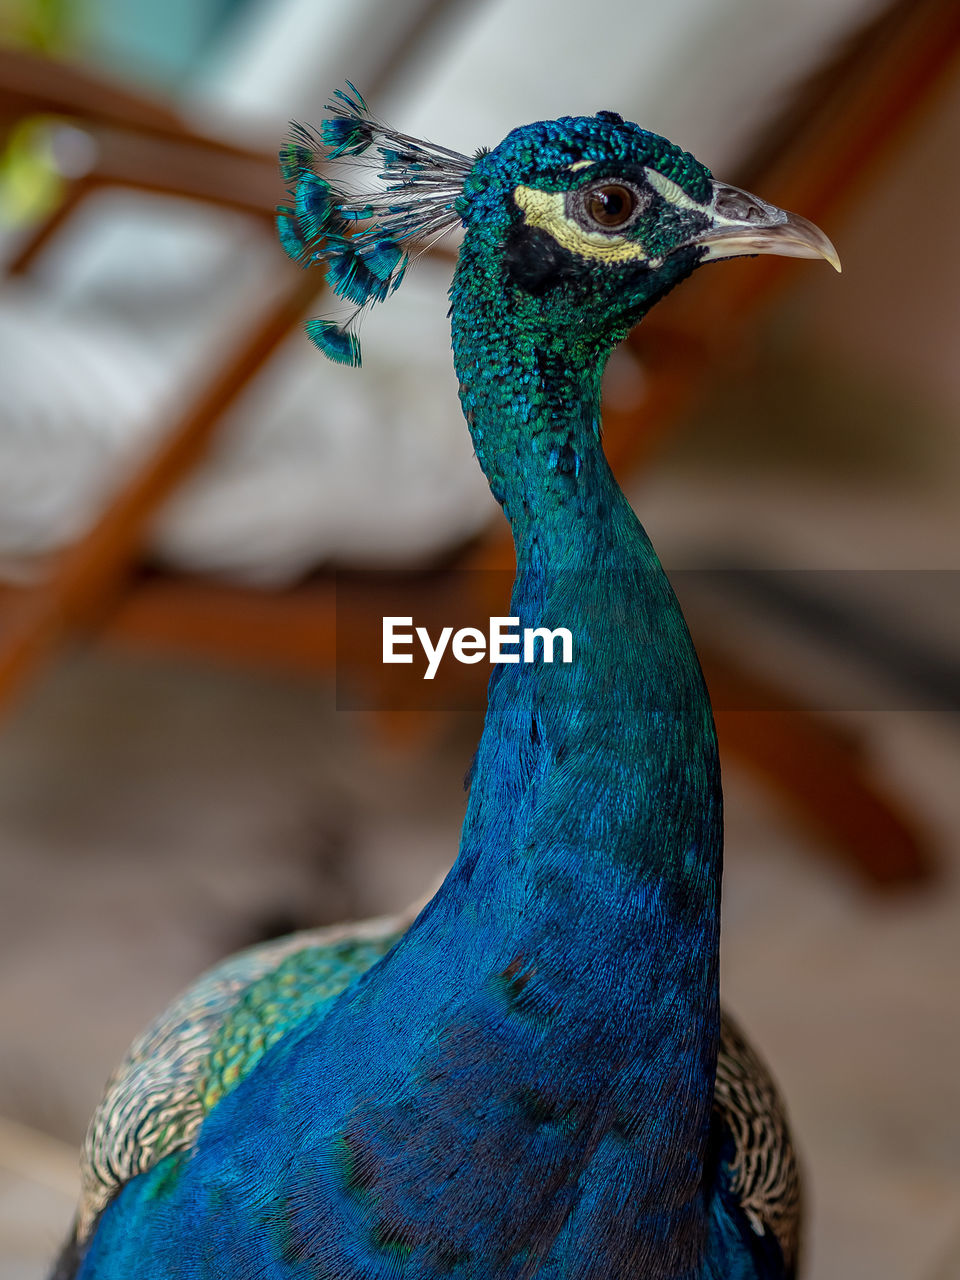 CLOSE-UP OF A PEACOCK WITH BLUE EYES